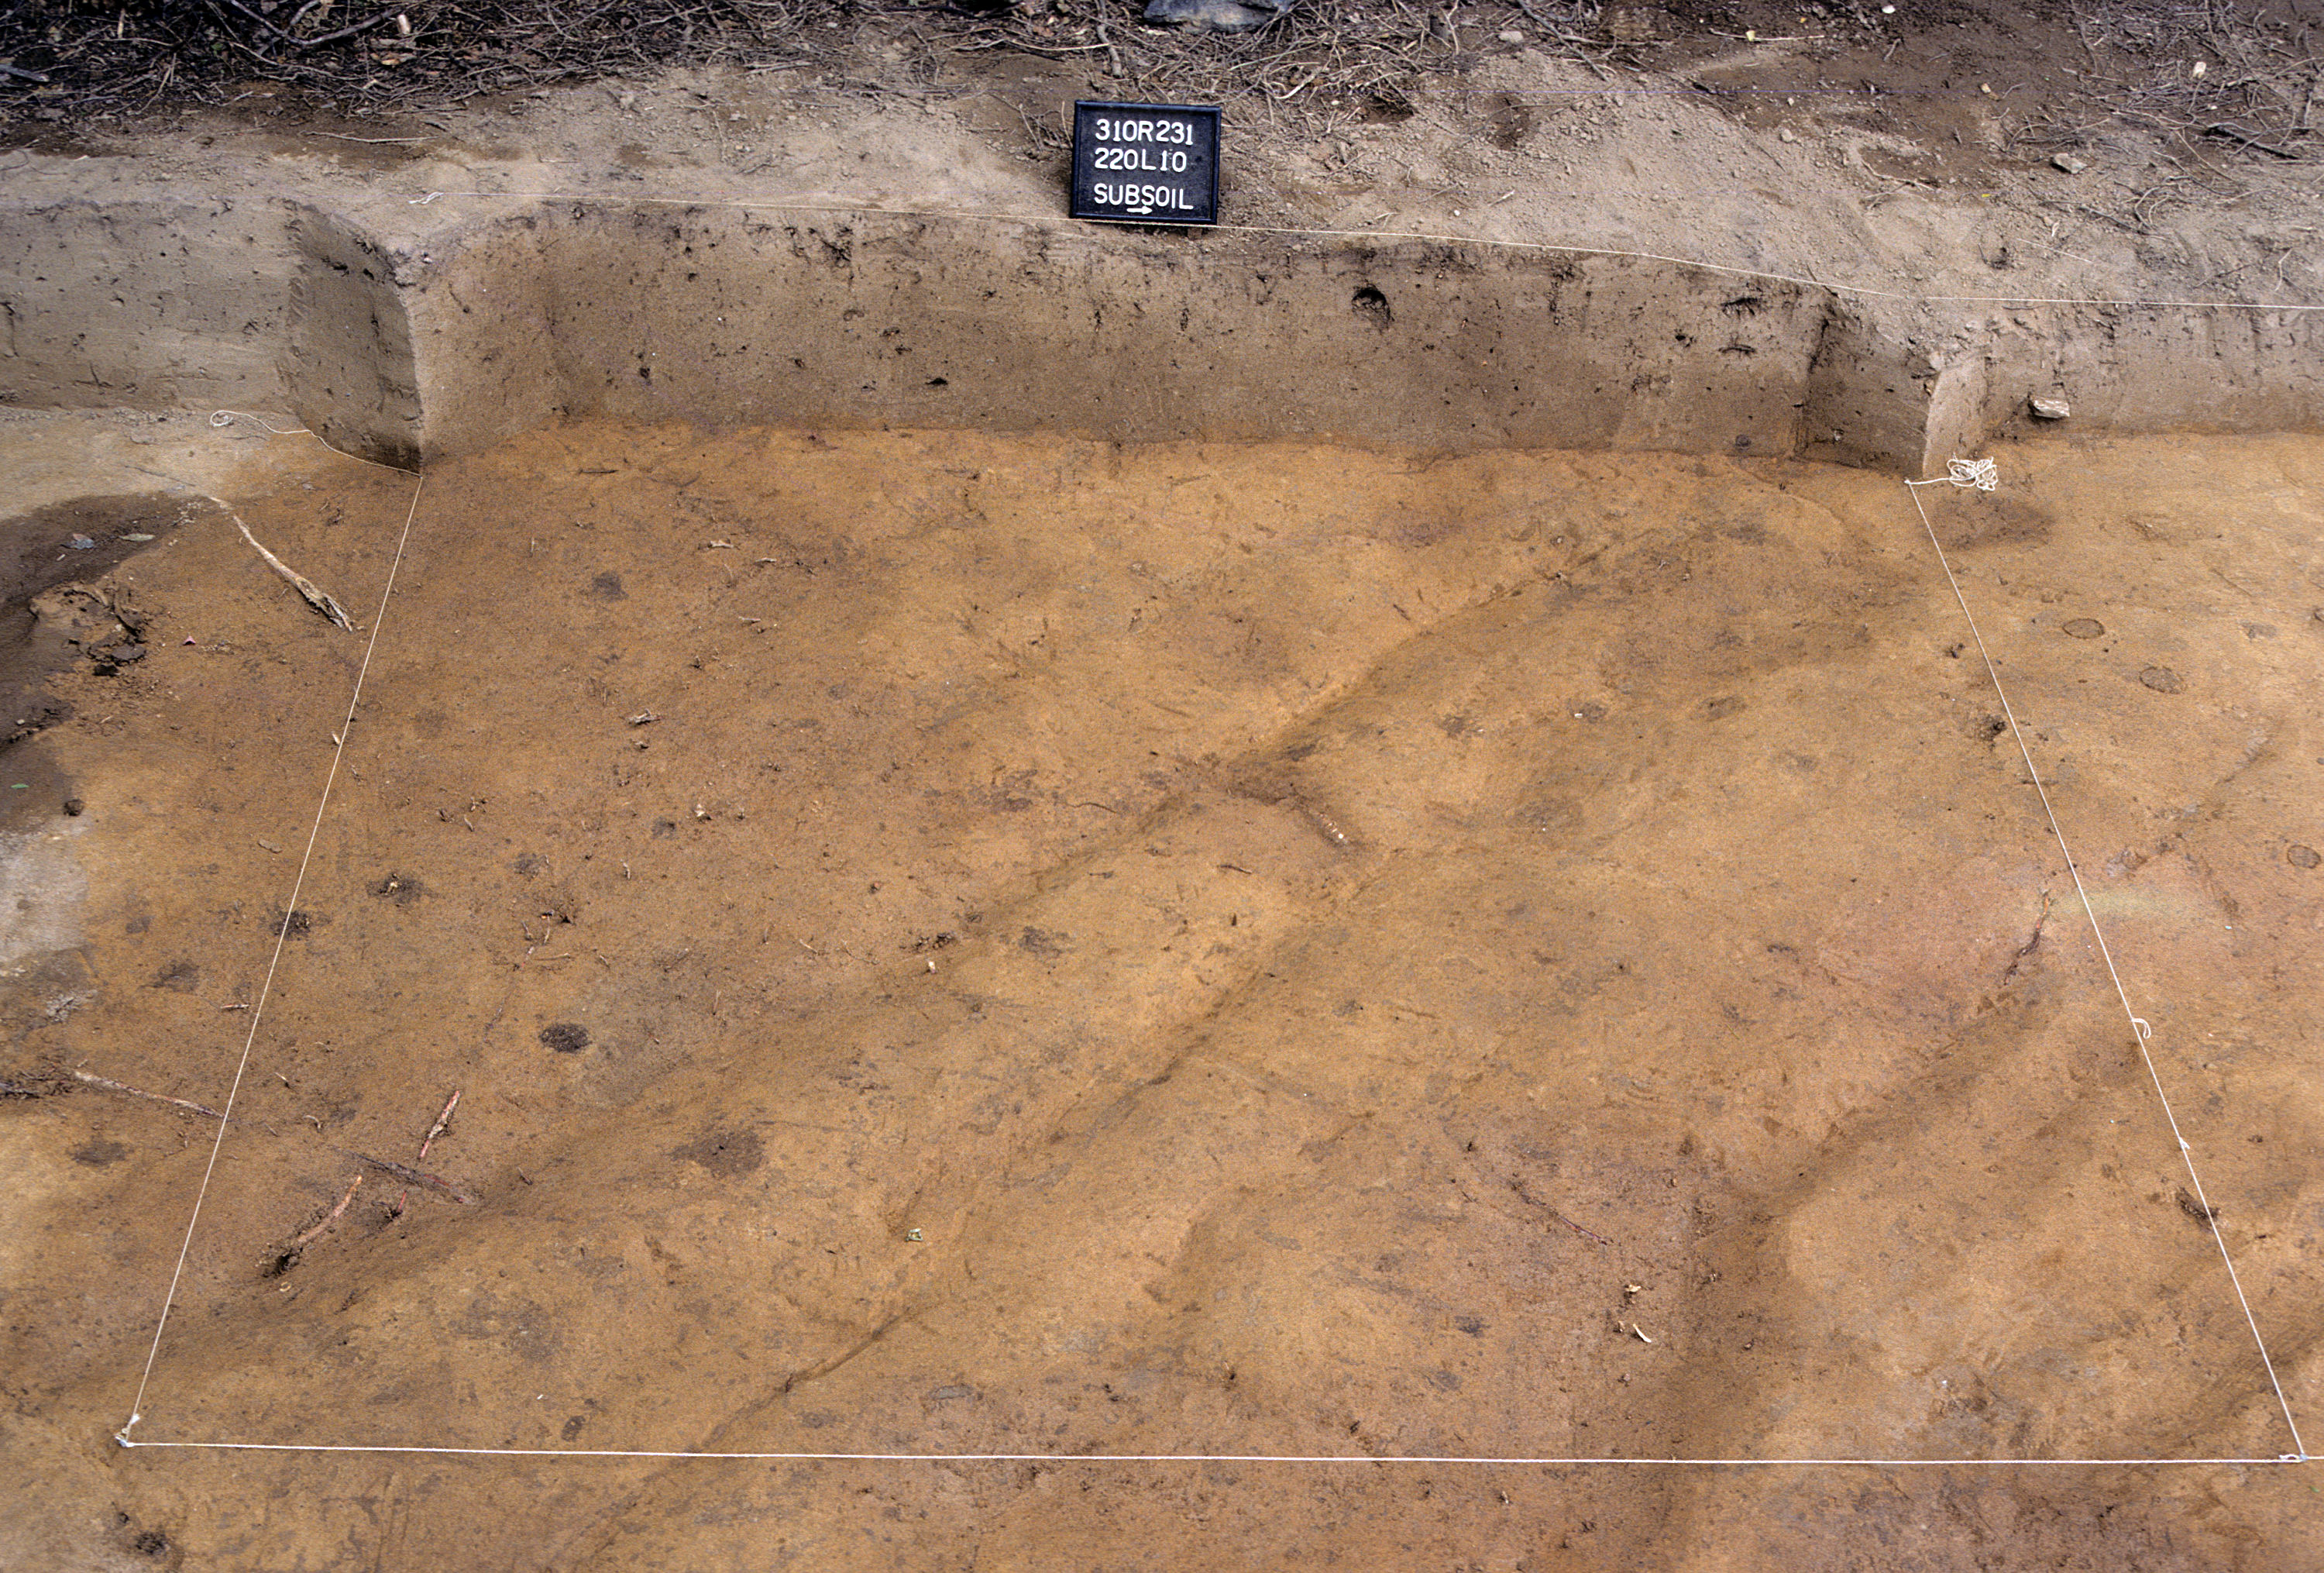 Figure 790. Sq. 220L10 at top of subsoil (view to west).